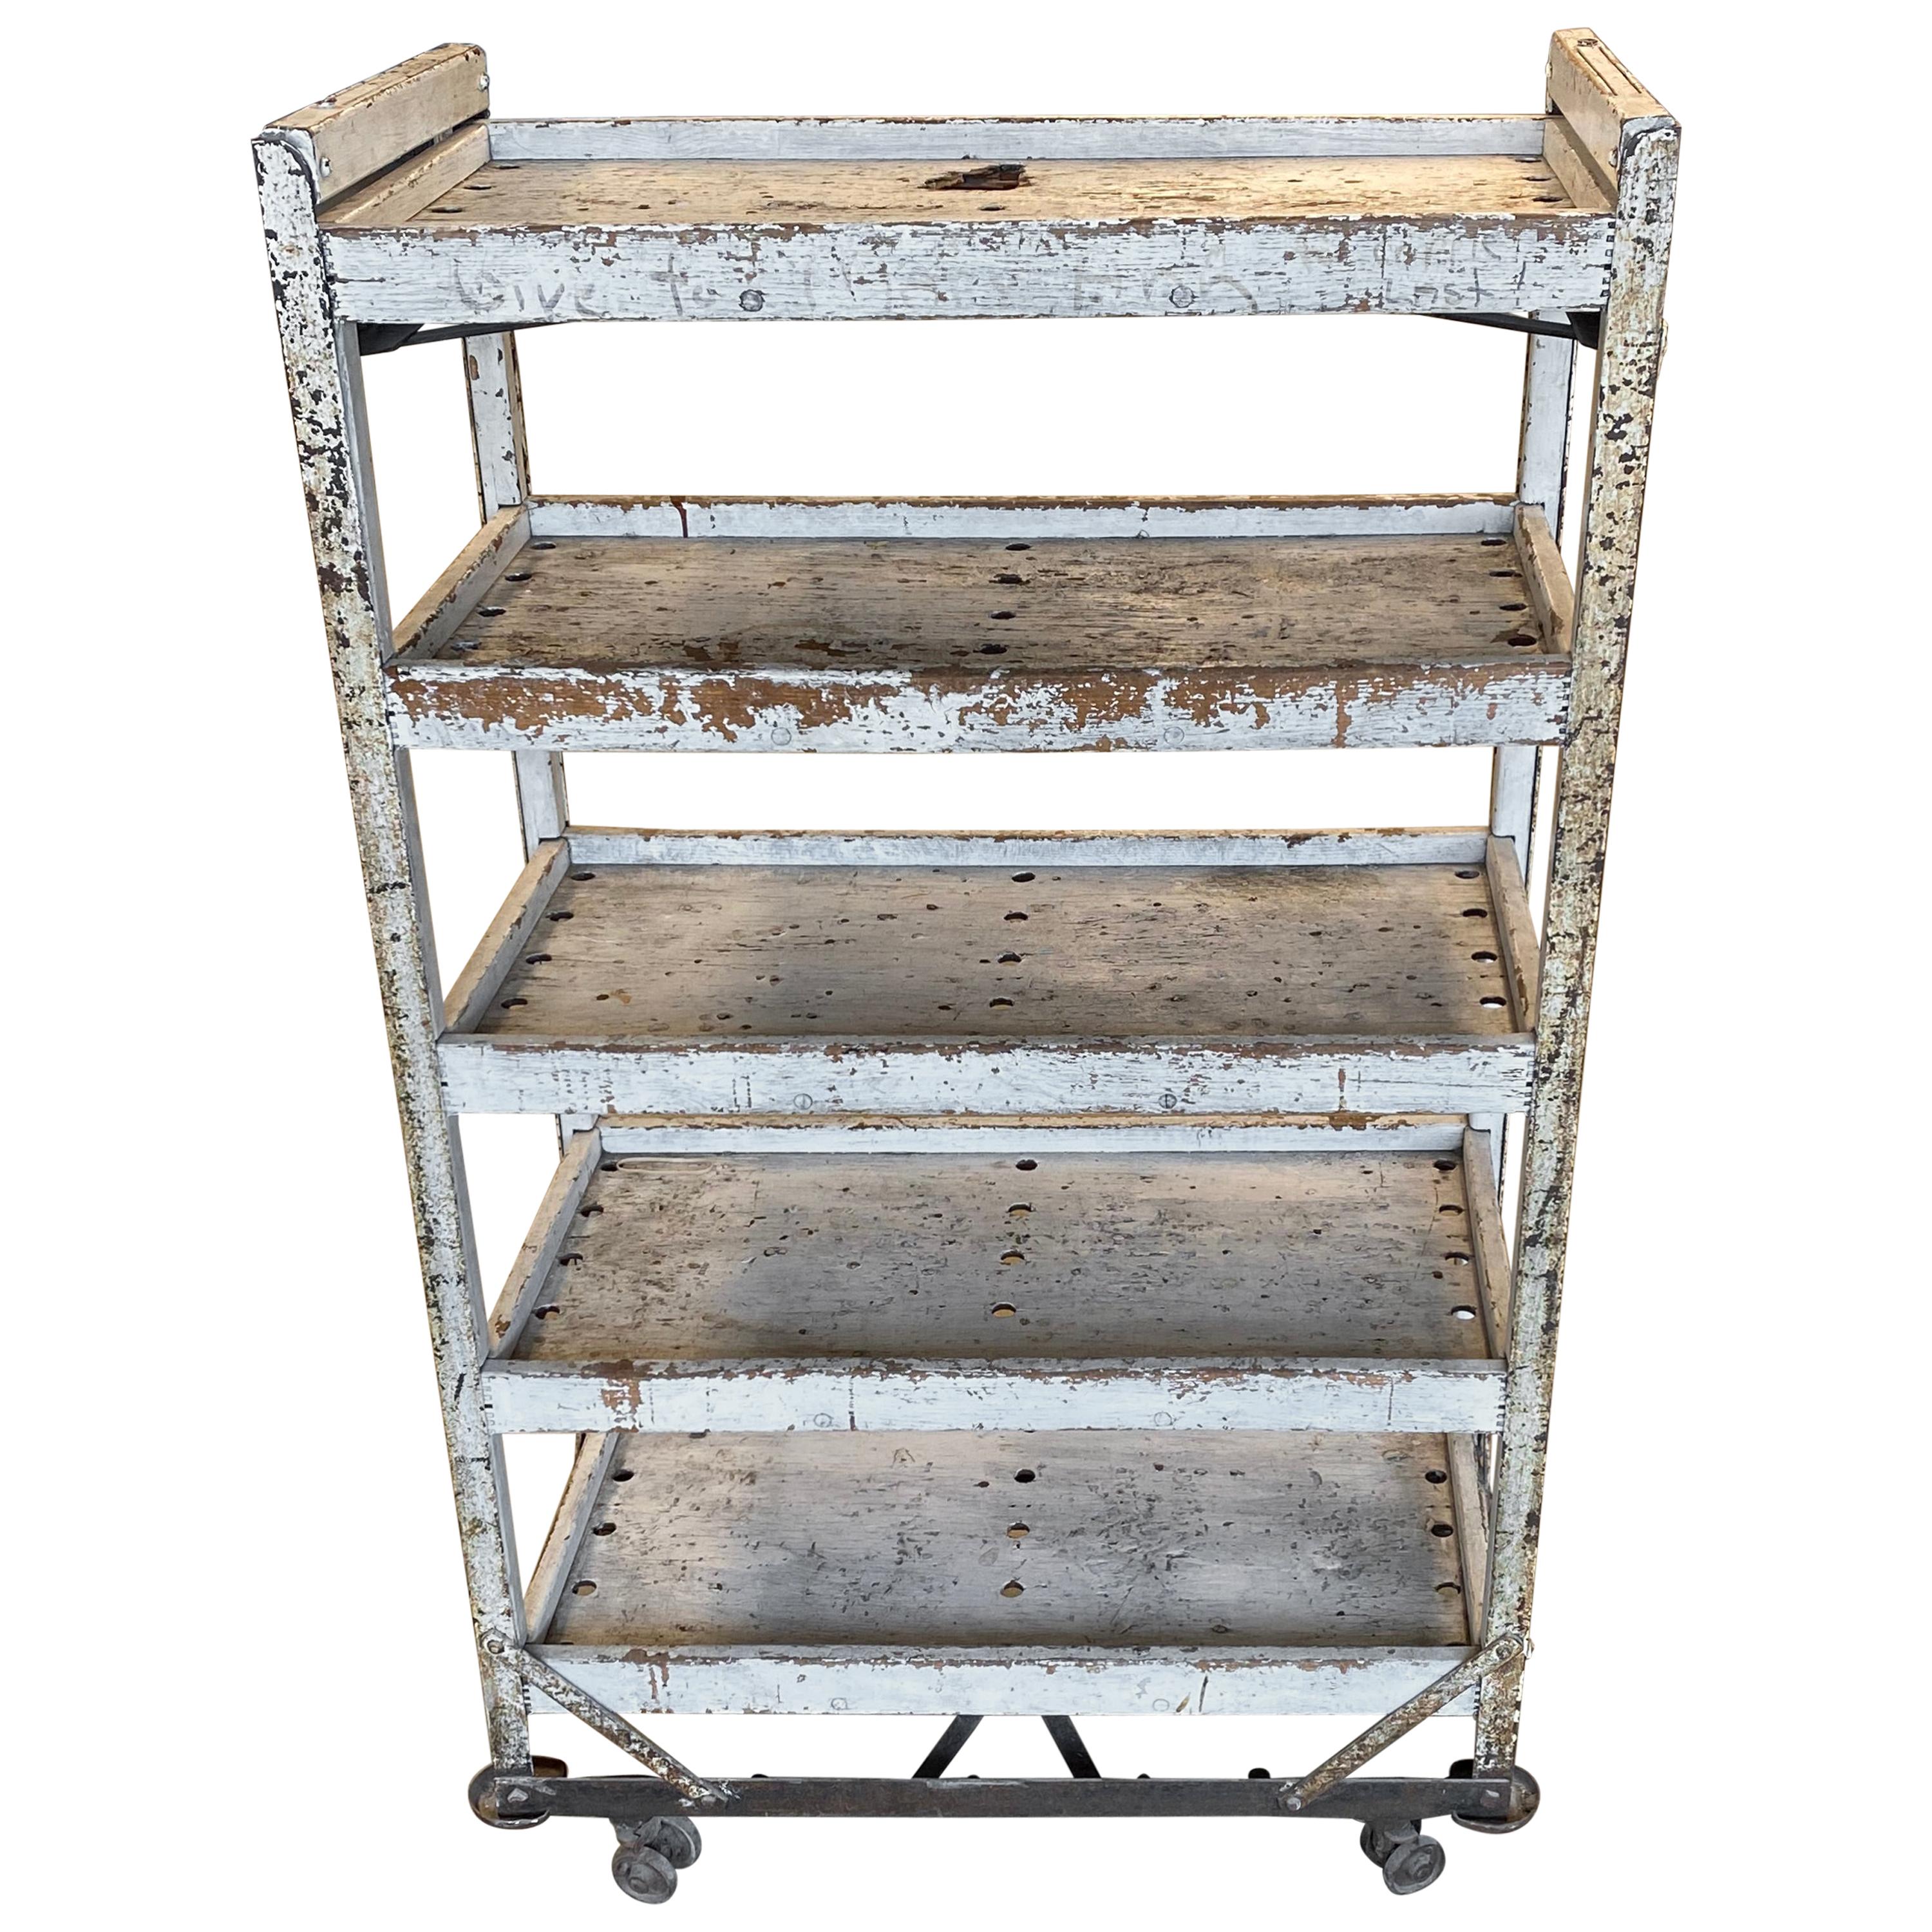 1930's Painted Wooden 5 Shelves Cart Or Bread Rack